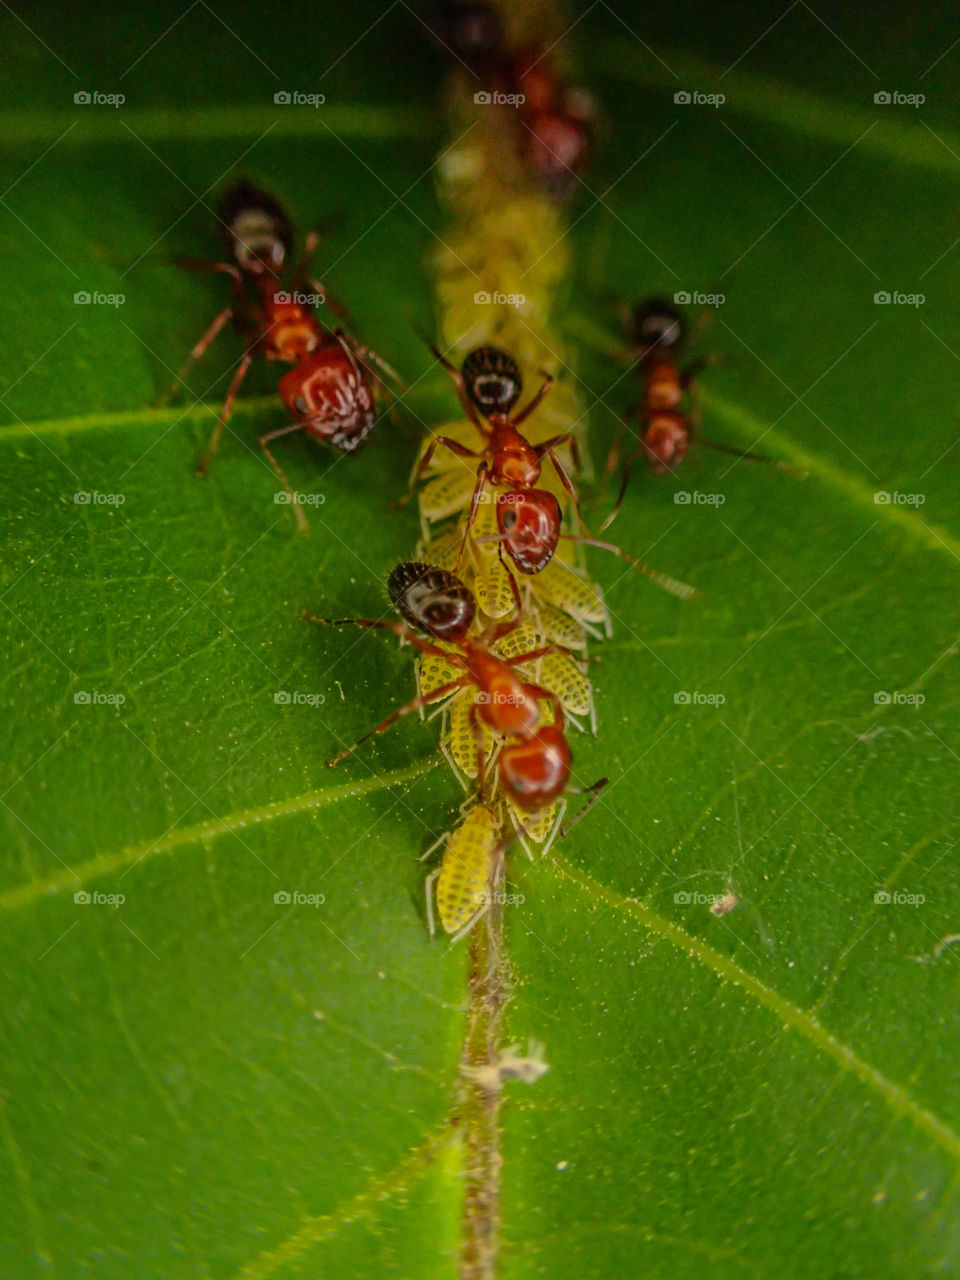 Ants harvesting aphids